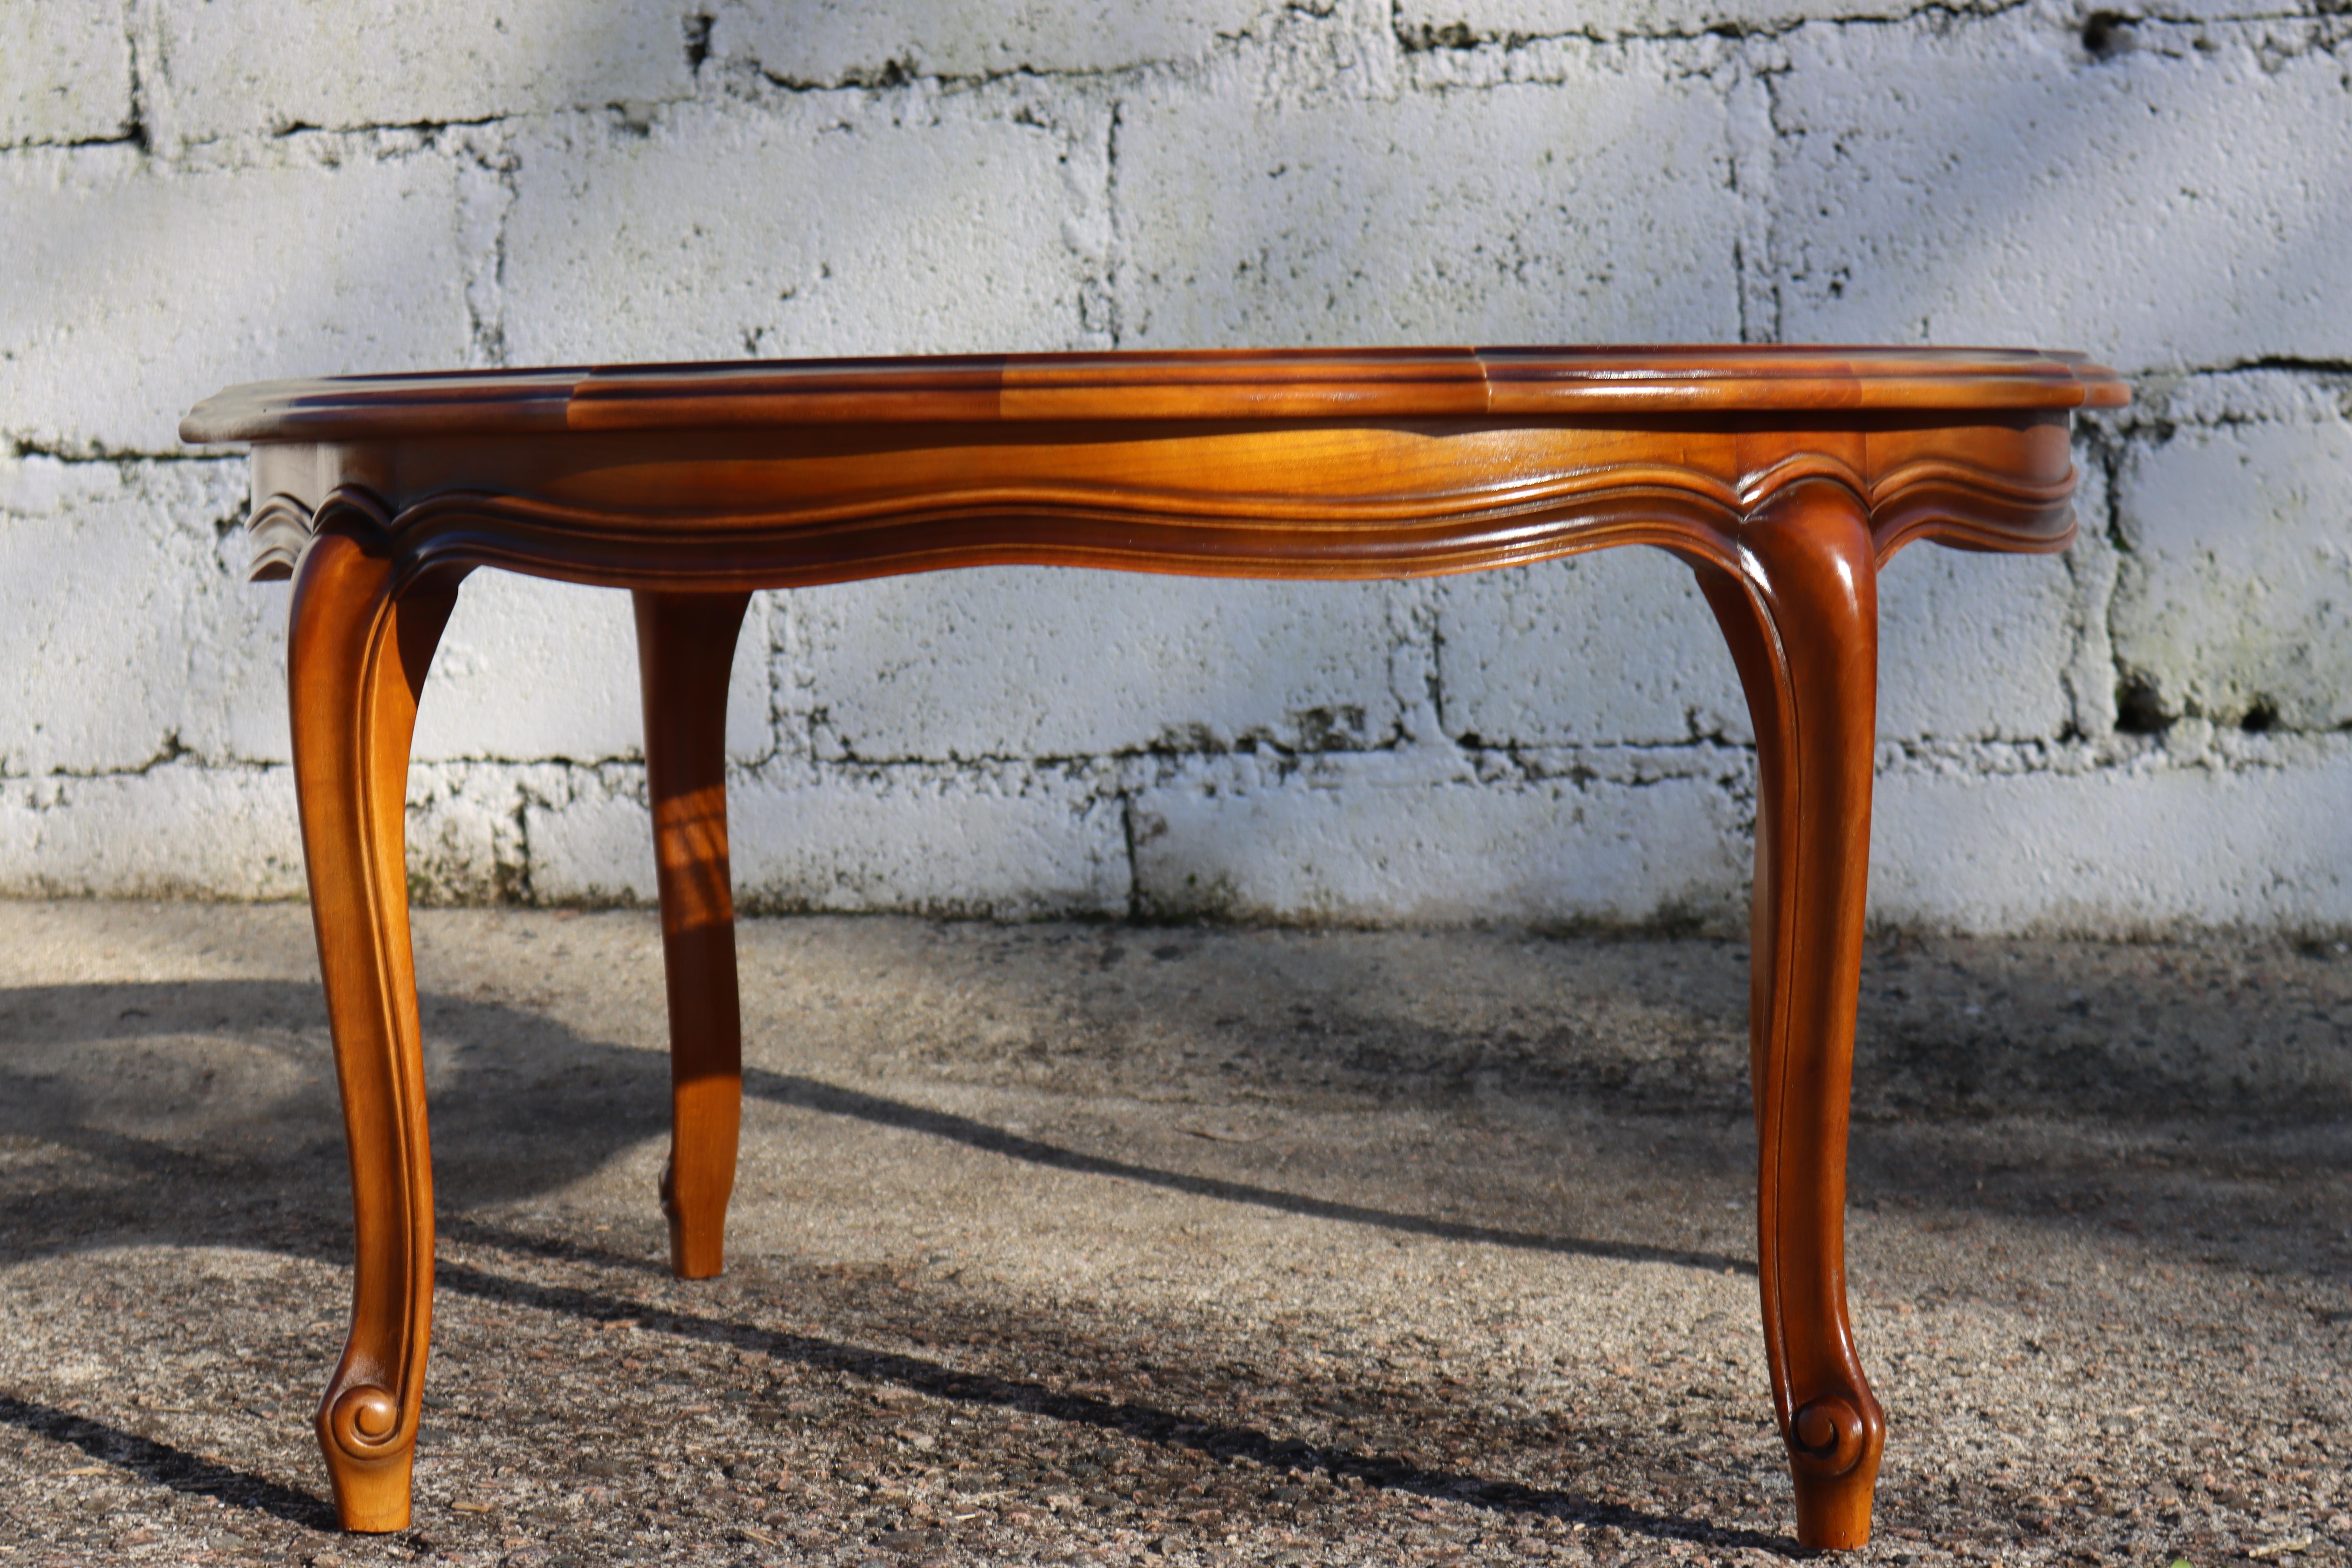 Big authentic round Cane Glass Coffee Table - Cocktail Table  from the 60s
Made of Cherry Wood, richly decorated with Wood Carvings-beautifully curved CabrioleLegs
The table has a Glass Insert, underneath an artistic Cane Wickerwork.

A beautiful